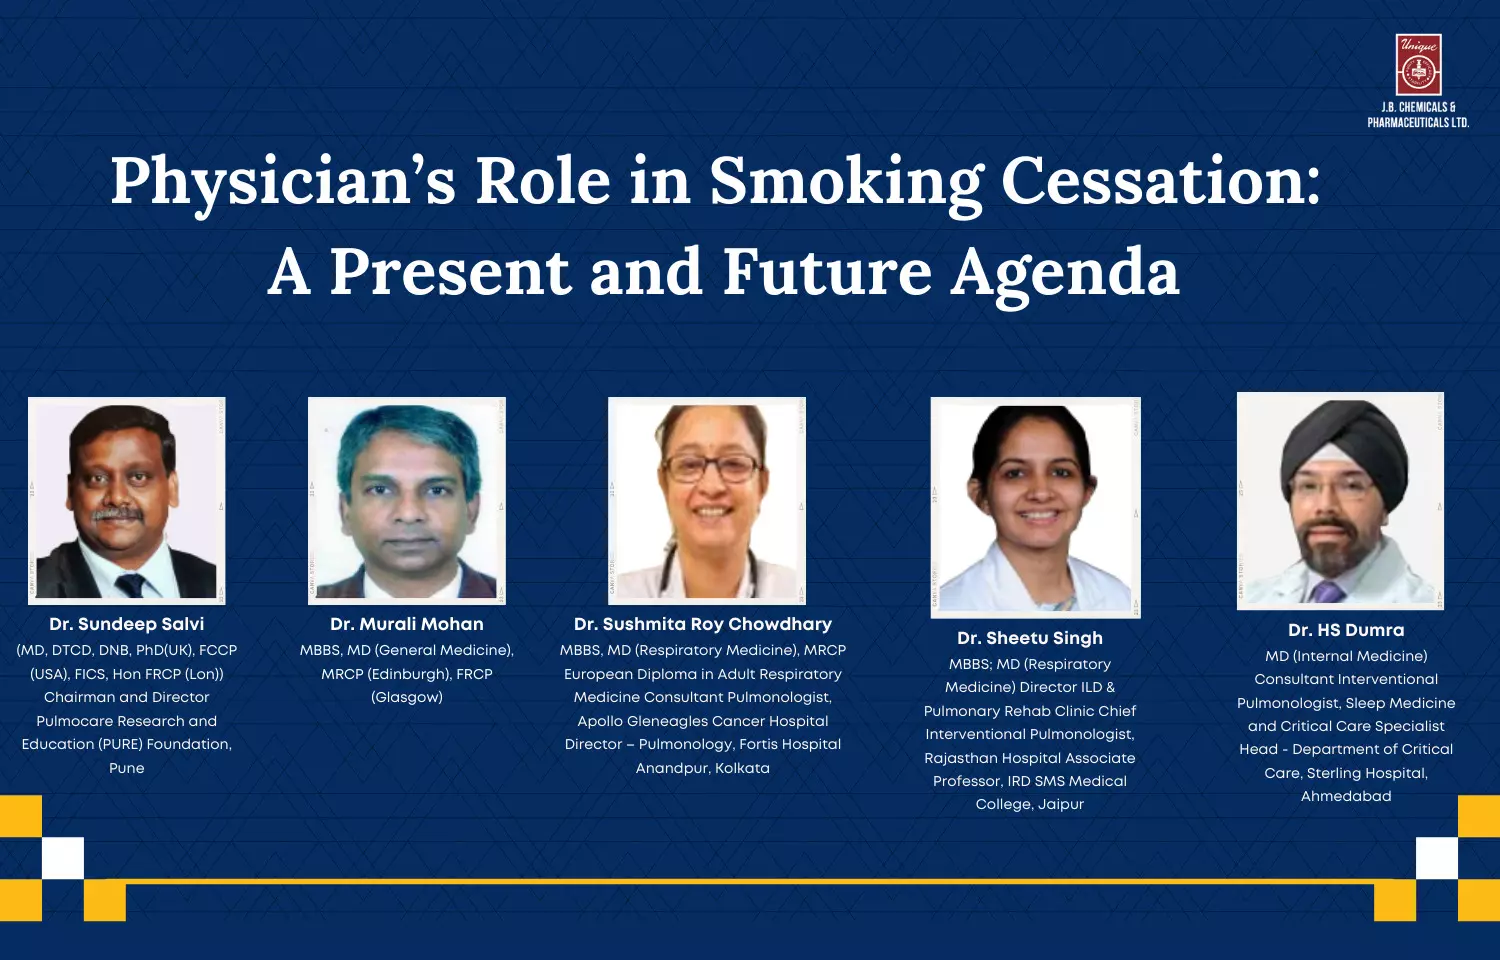 Physician’s Role in Smoking Cessation: A Present and Future Agenda